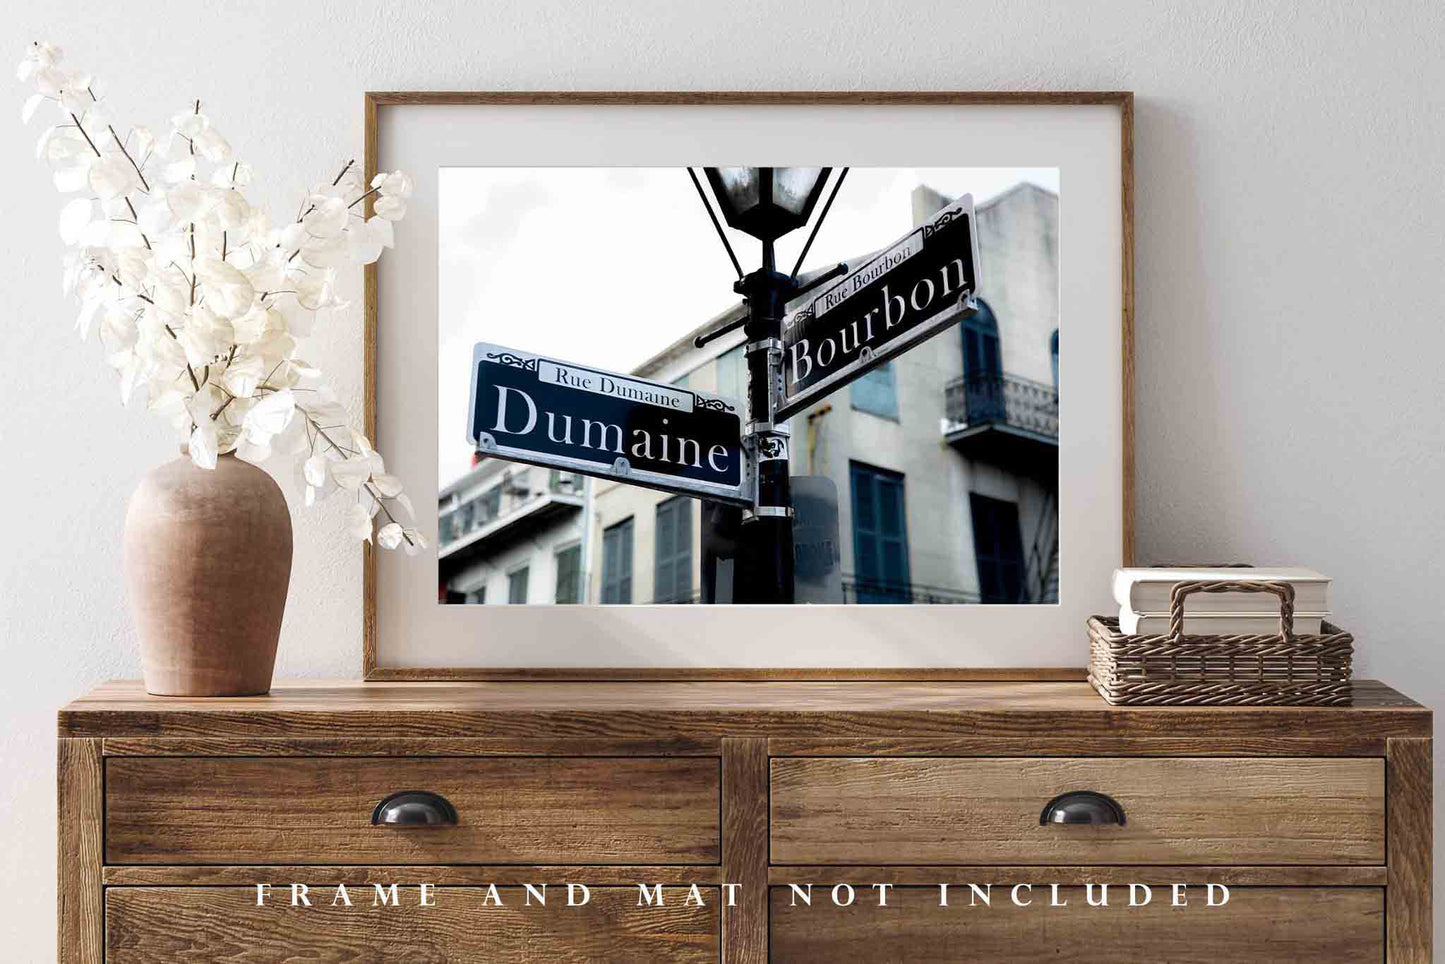 NOLA Photography Print (Not Framed) Picture of Street Signs at Intersection of Dumaine and Bourbon Street in New Orleans Louisiana Wall Art French Quarter Decor